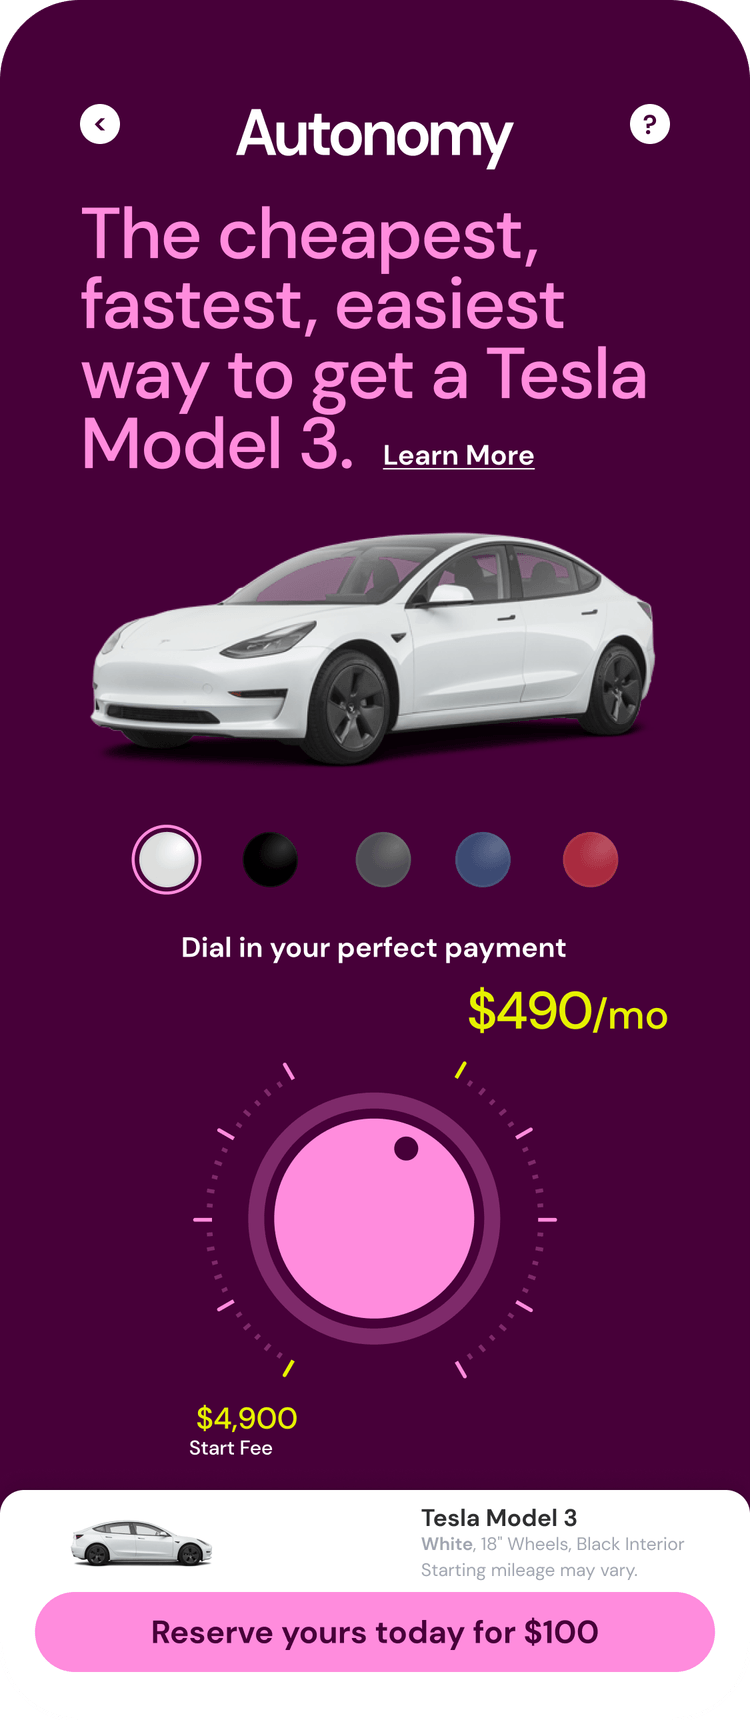 Image of the Autonomy mobile app car subscription cost calculator